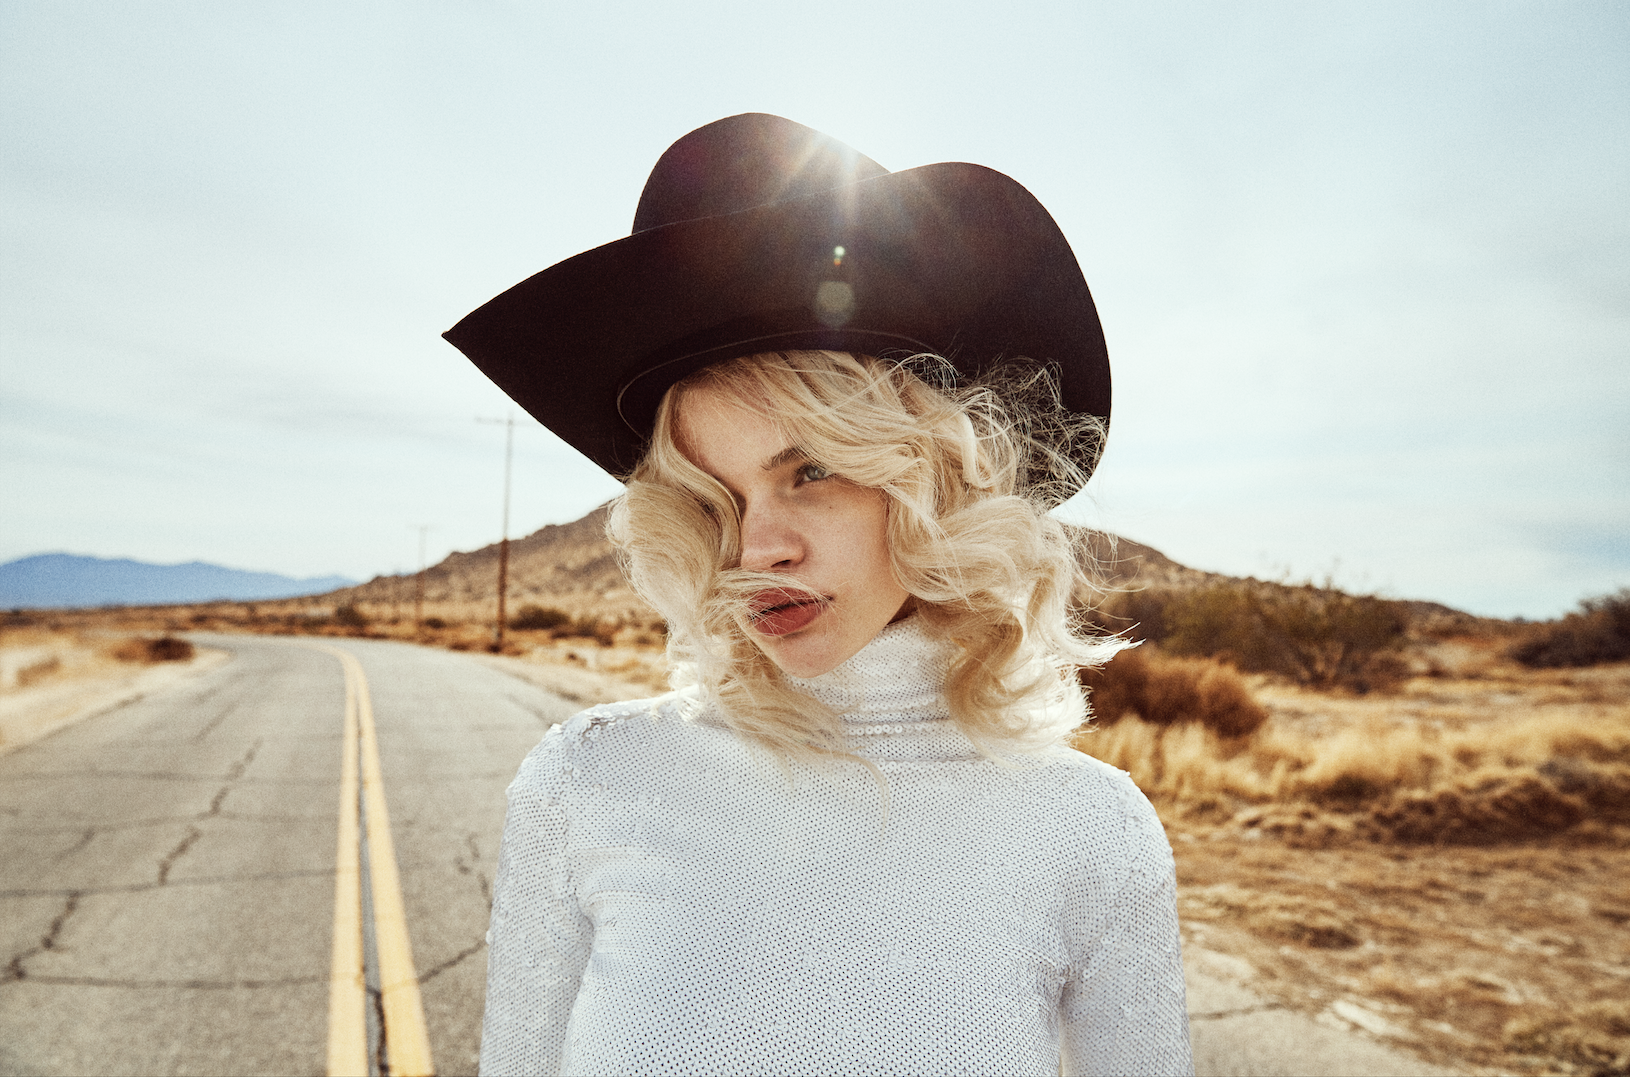 Paul Sinclaire | Vogue Japan: Cowgirl of the desert | 2